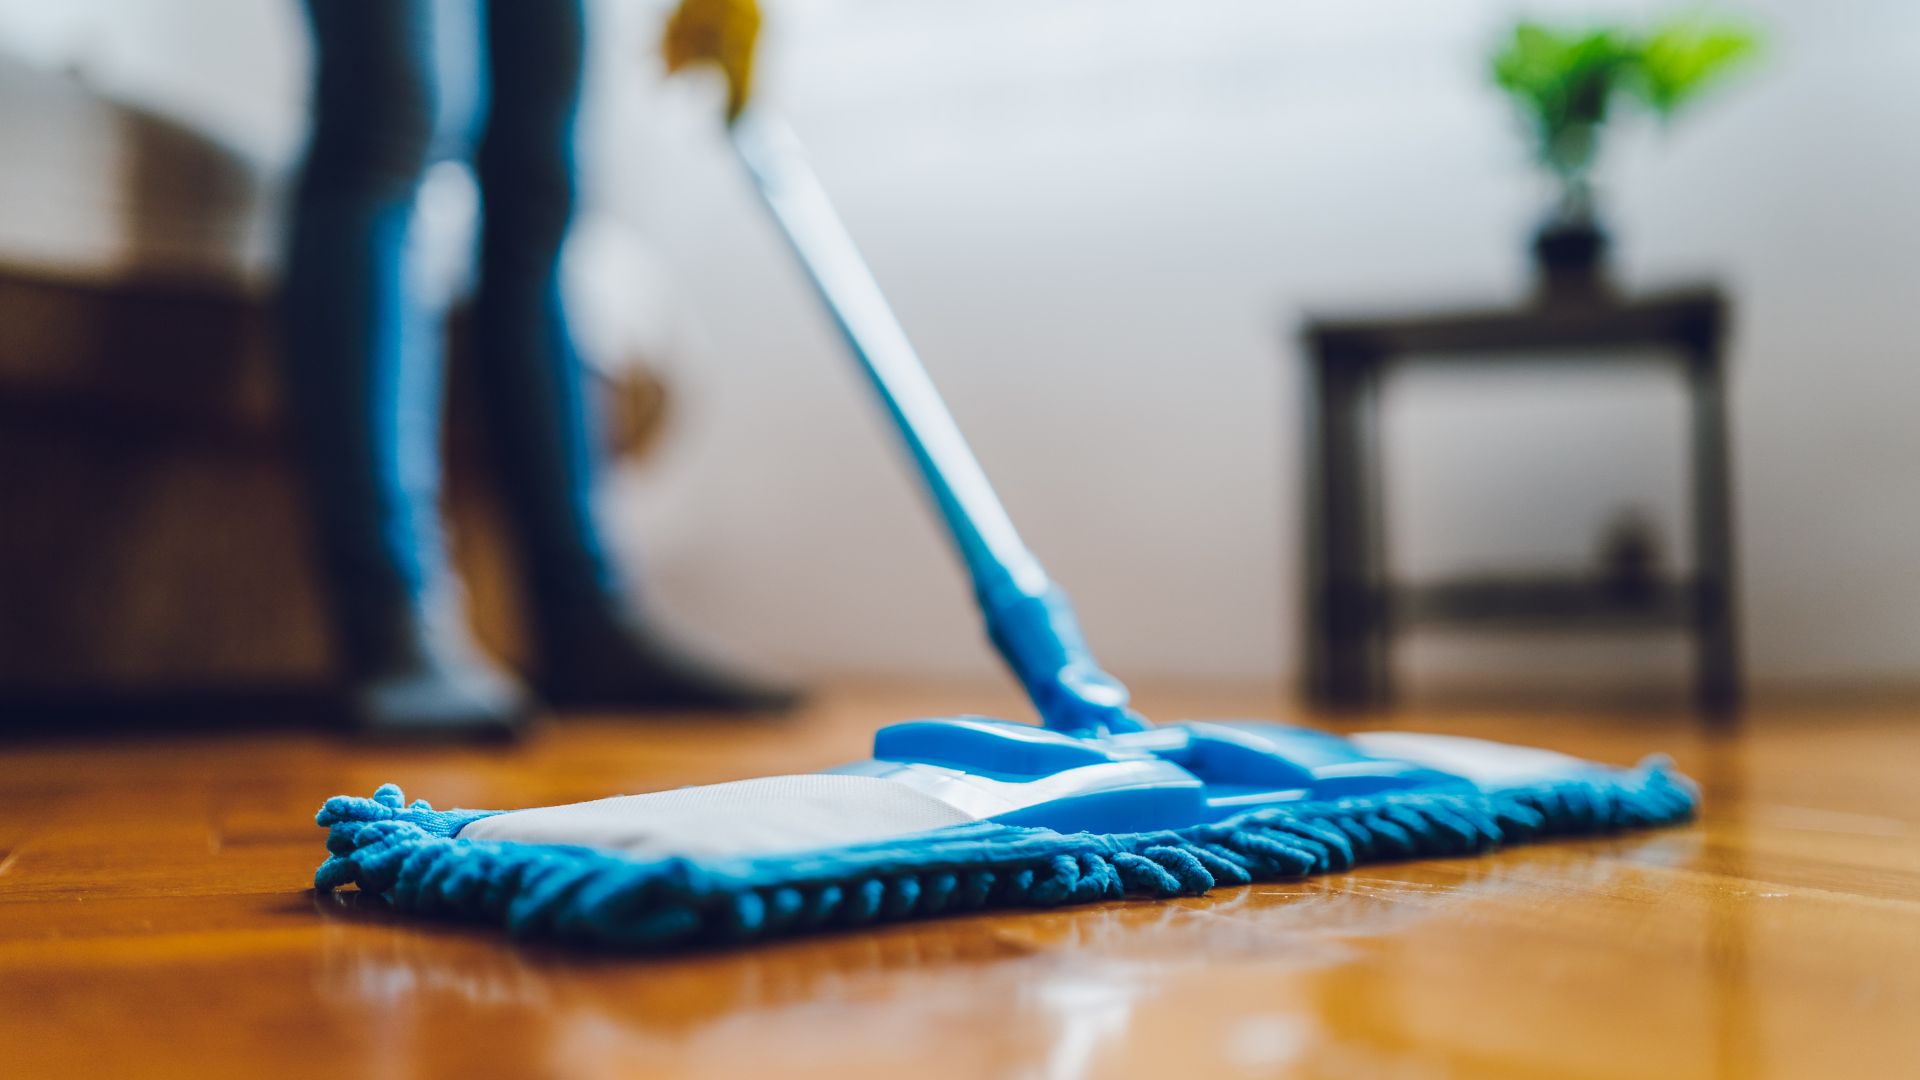 6 Grout Cleaning Hacks - Maid & Cleaning Service Atlanta